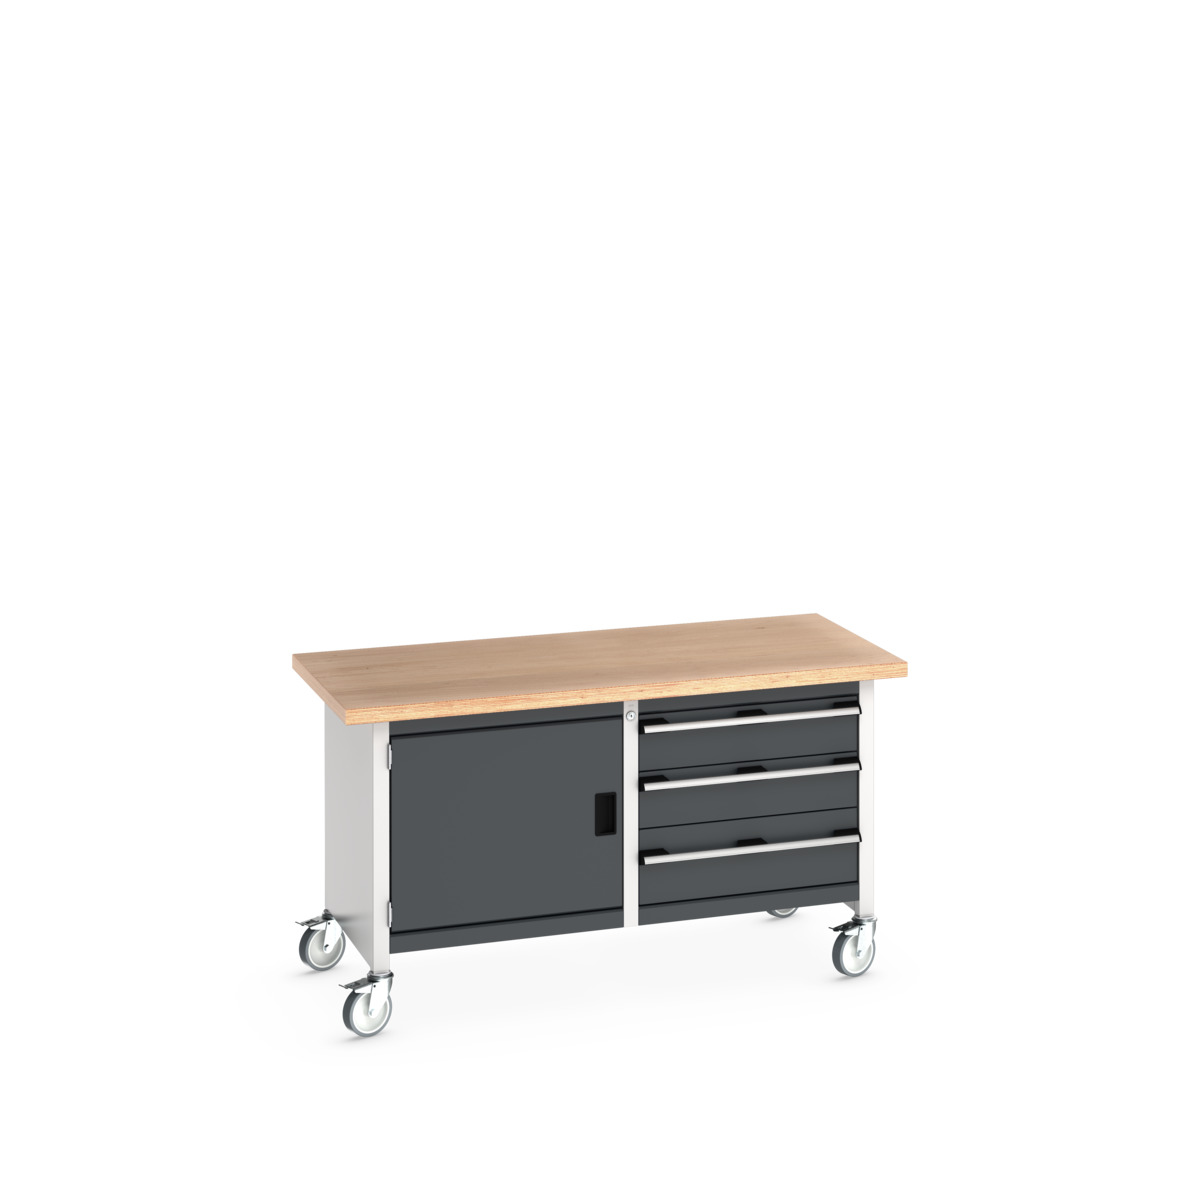 41002100.19V - cubio mobile storage bench (mpx)